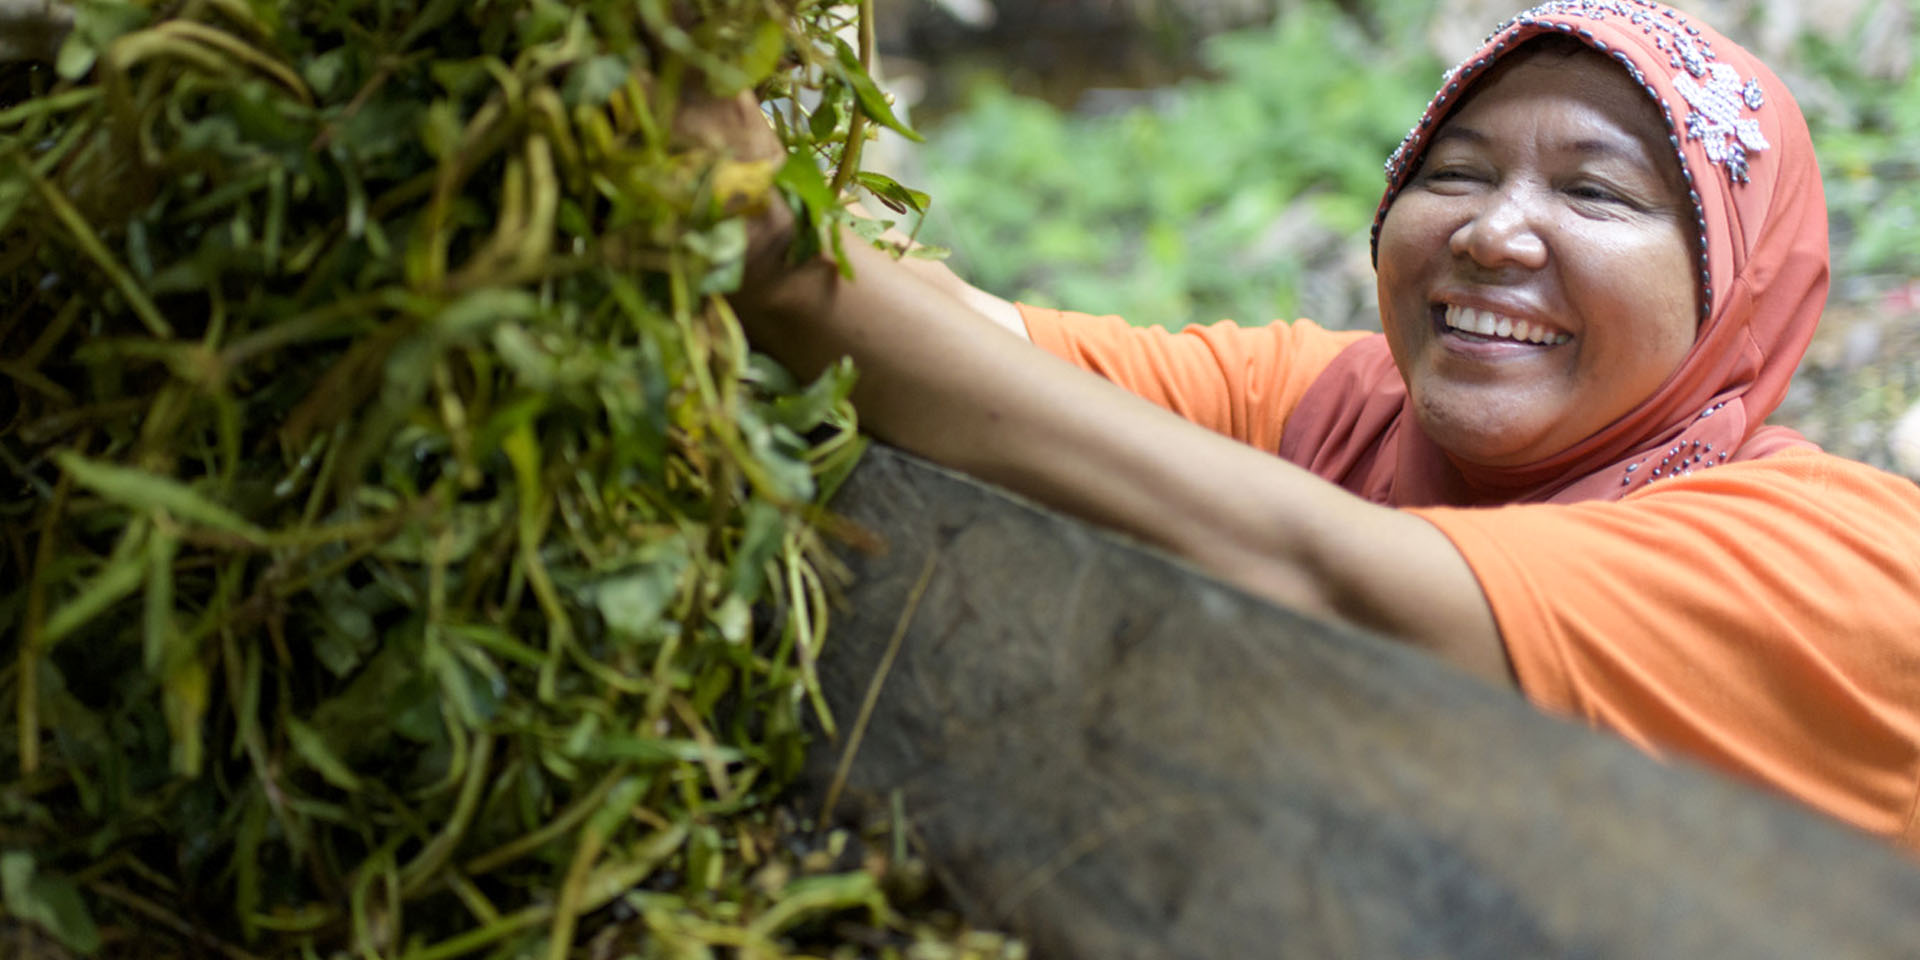 A smiling woman loading greenery into a large container.